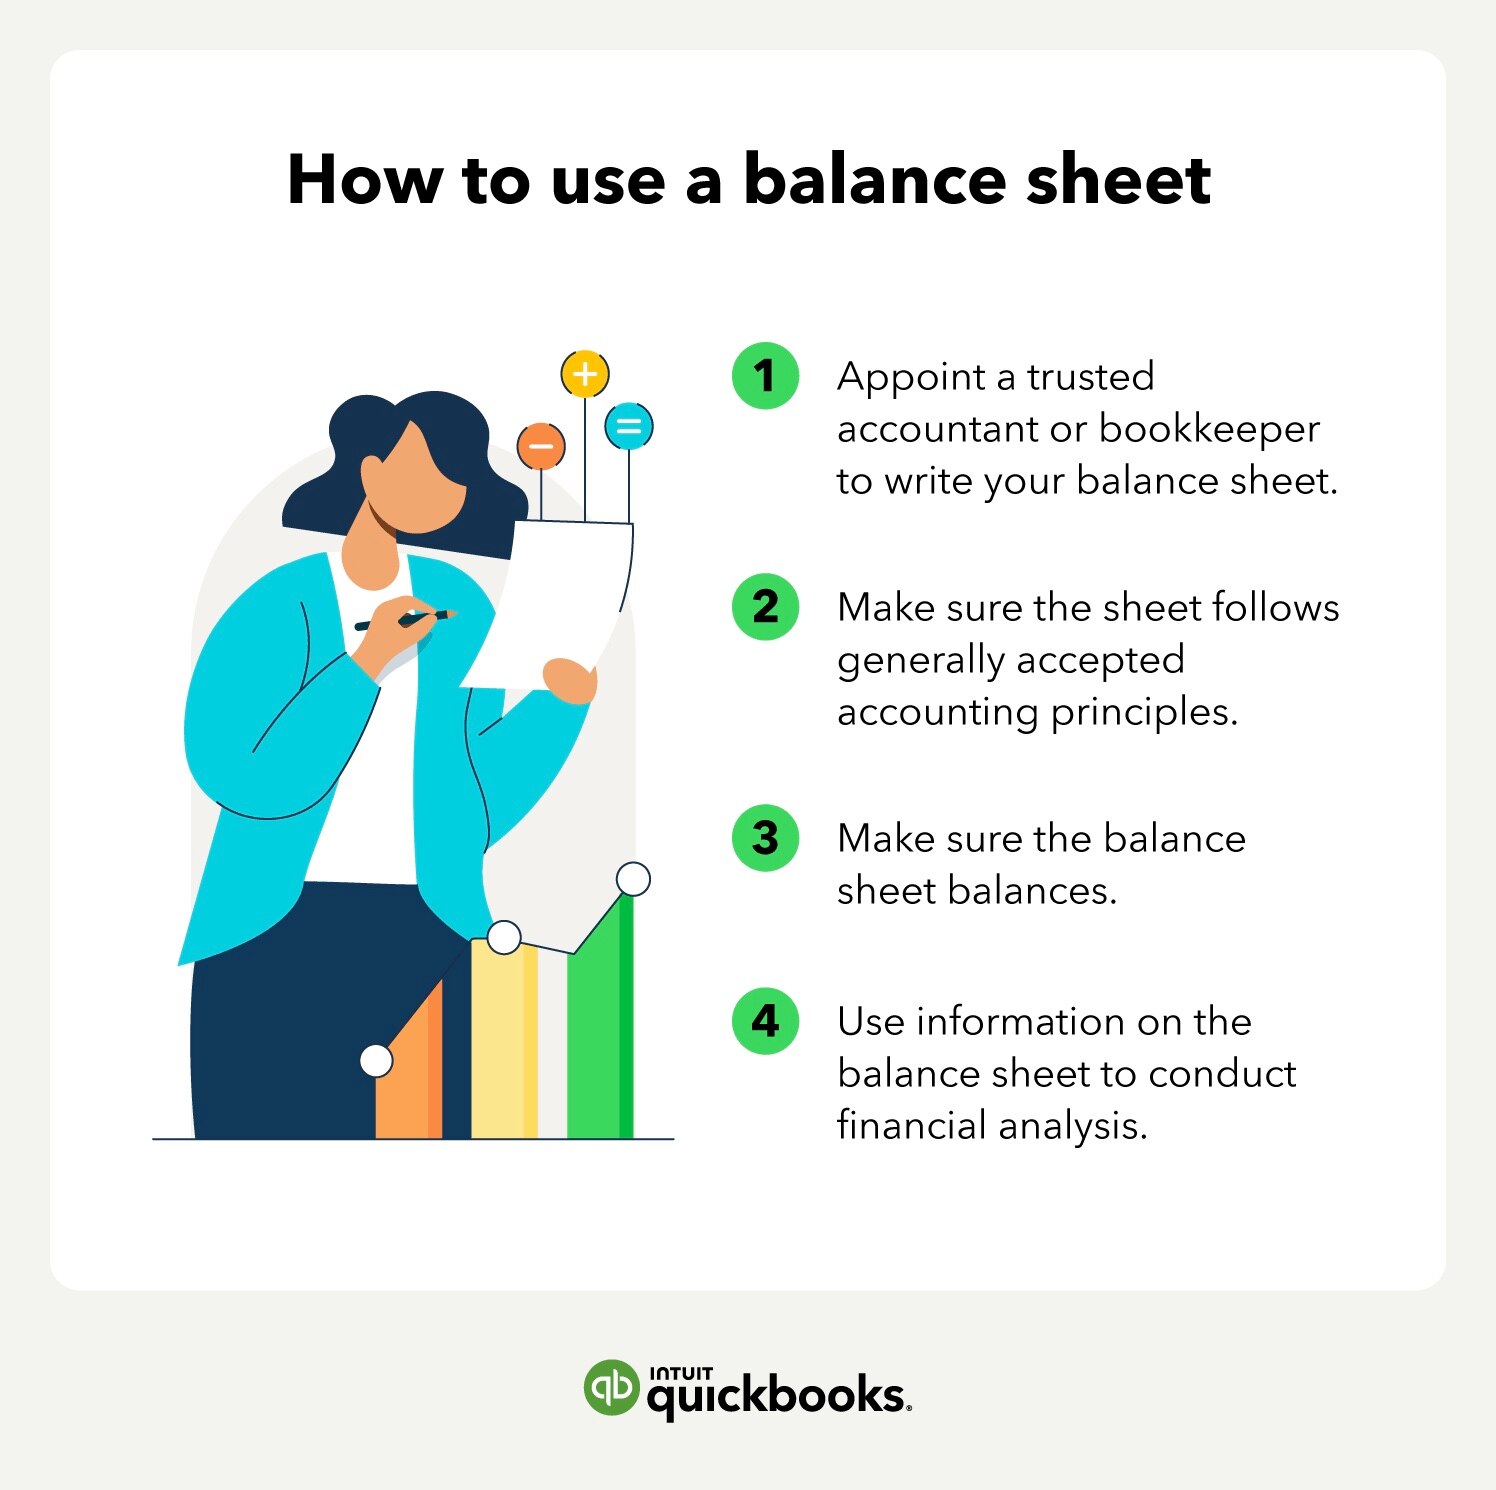 How to use a balance sheet. 1. Appoint a trusted accountant or bookkeeper to write your balance sheet. 2. Make sure the sheet follows generally accepted accounting principles. 3. Make sure the balance sheet balances. 4. Use information on the balance sheet to conduct financial analysis.